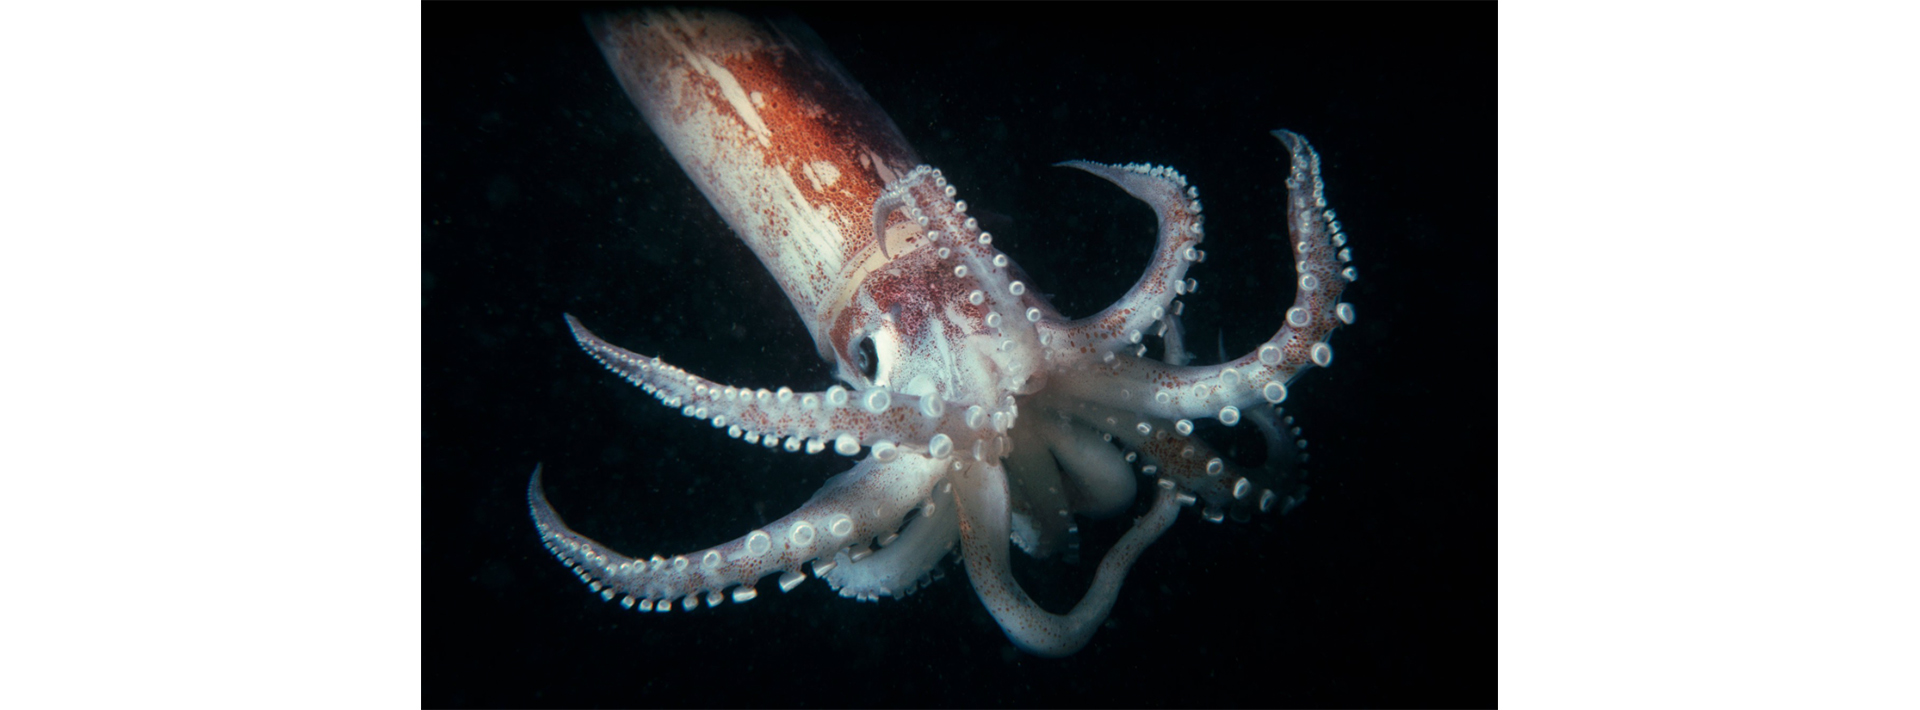 Research on the camouflaging characteristics of squid featured in New York Times